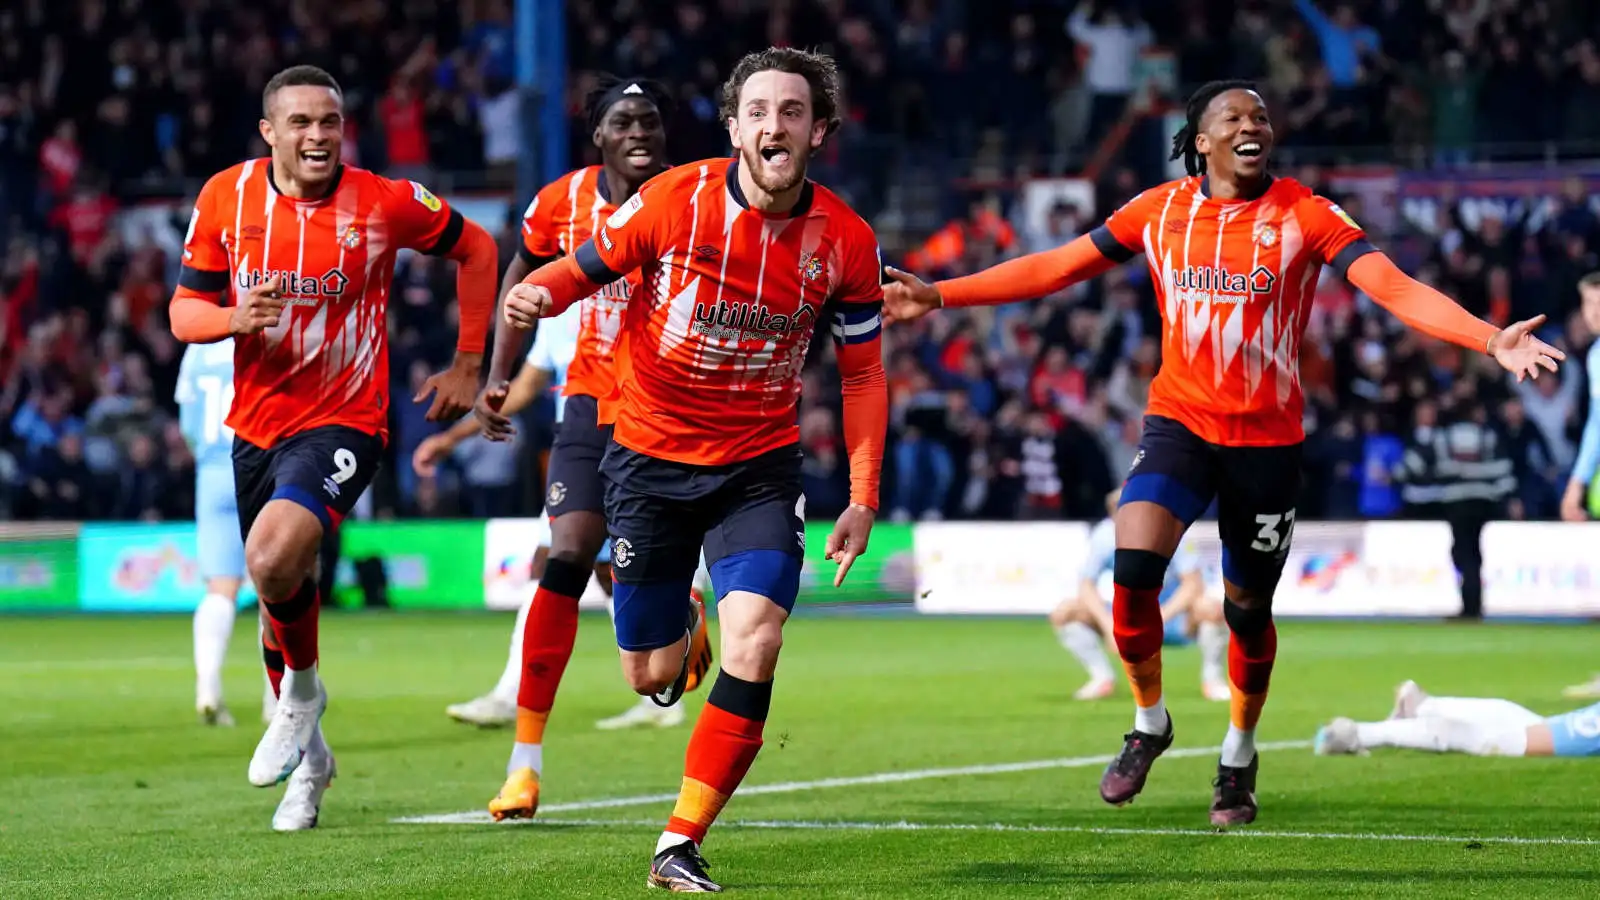 Luton Town: The fall and rise of a football club eventually saved by love